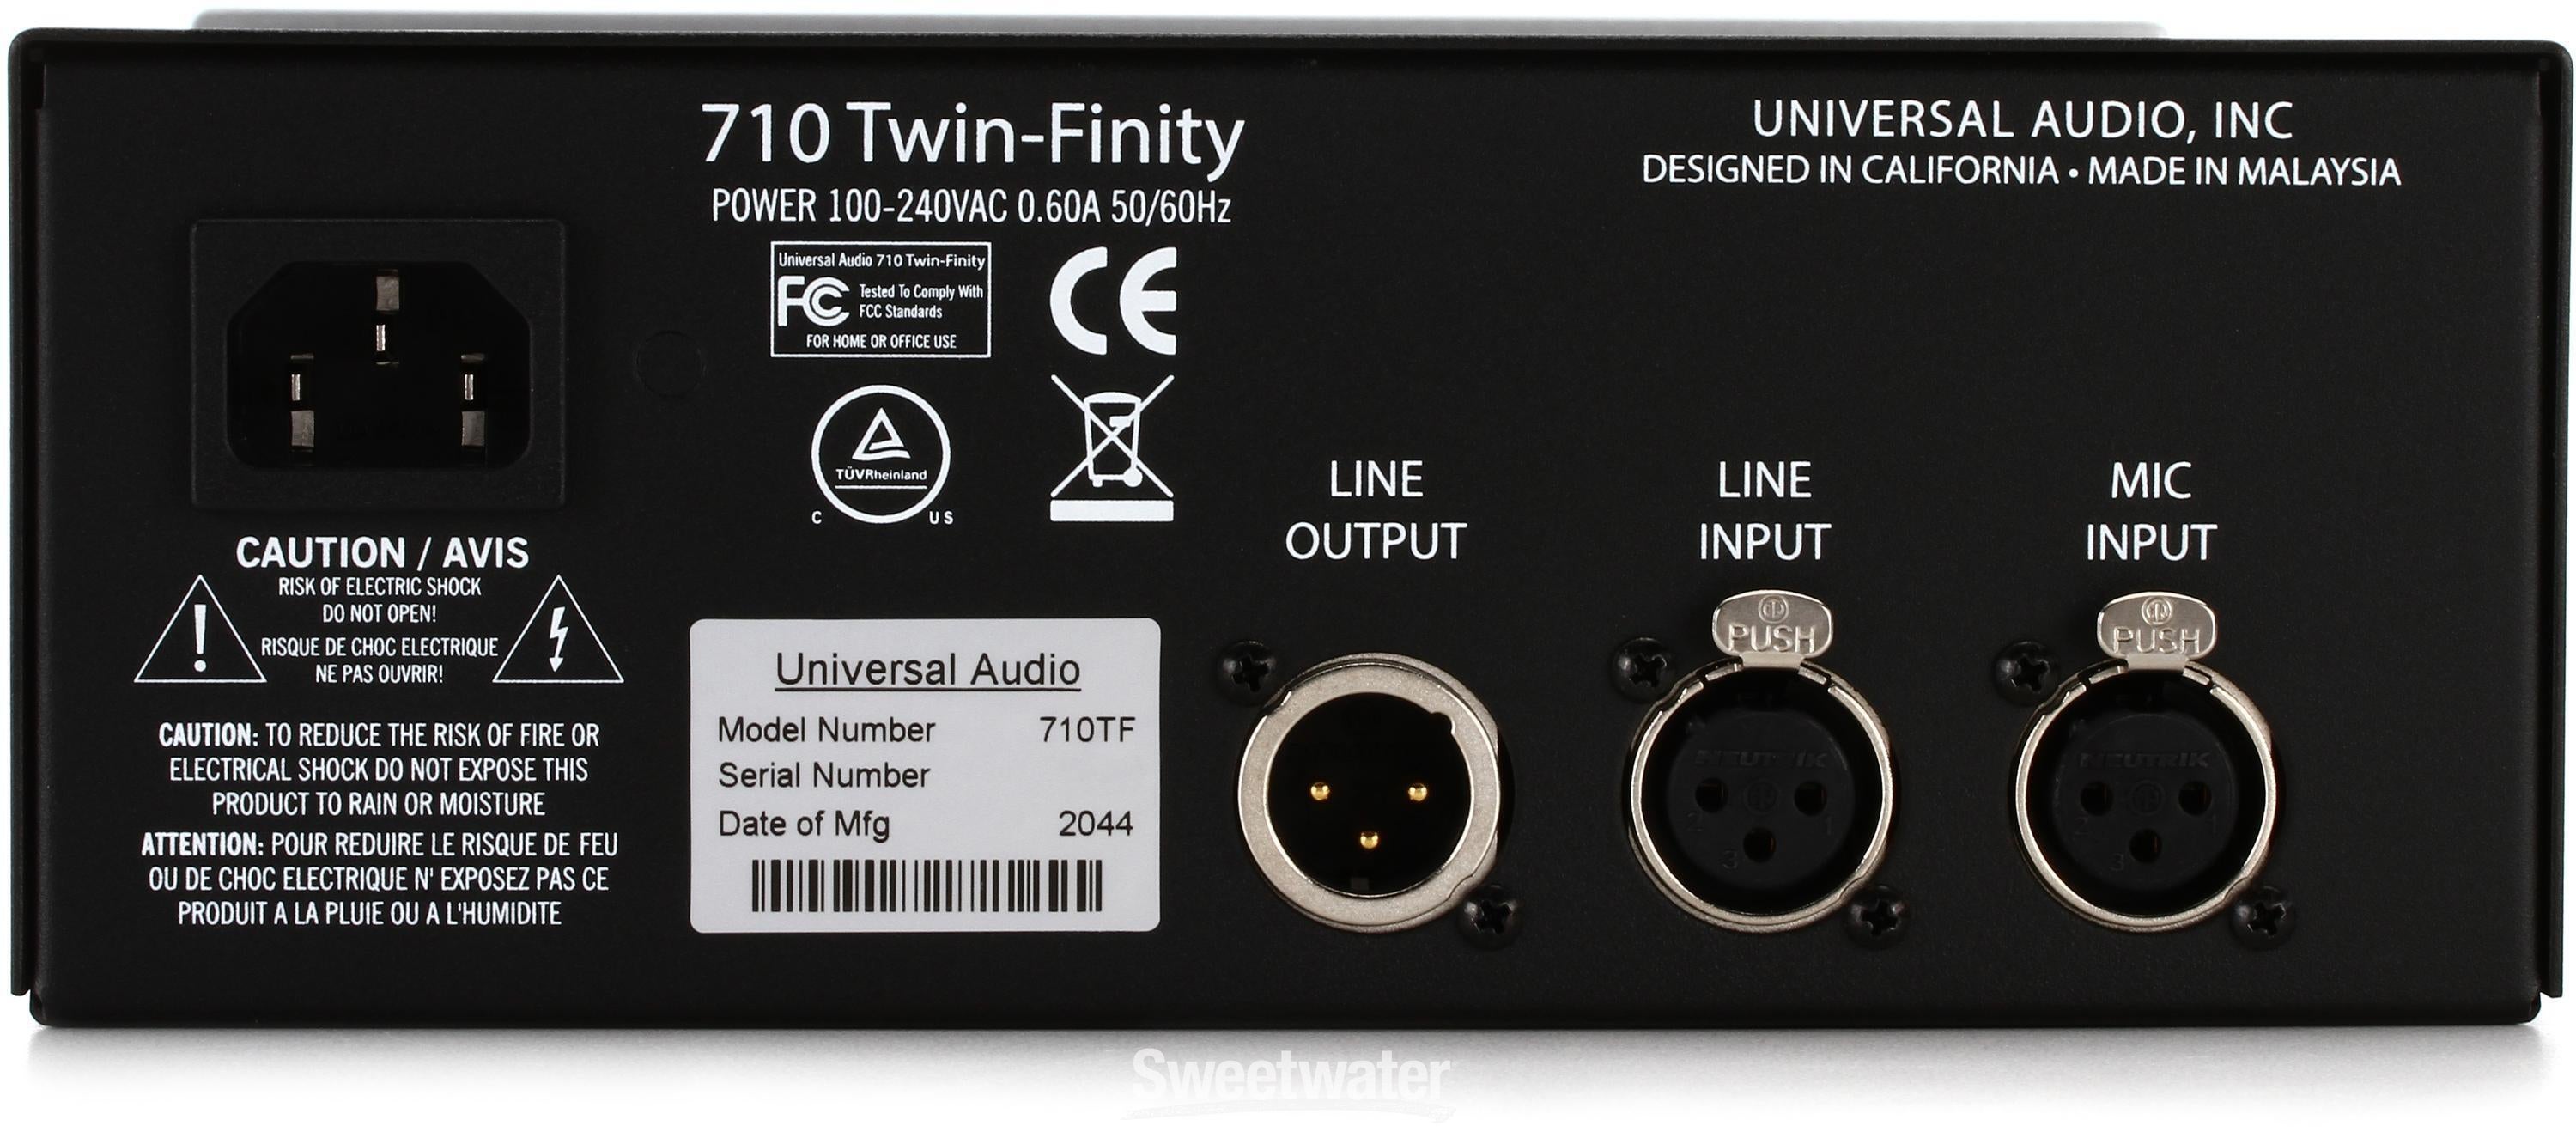 Universal Audio 710 Twin-Finity Microphone Preamp | Sweetwater